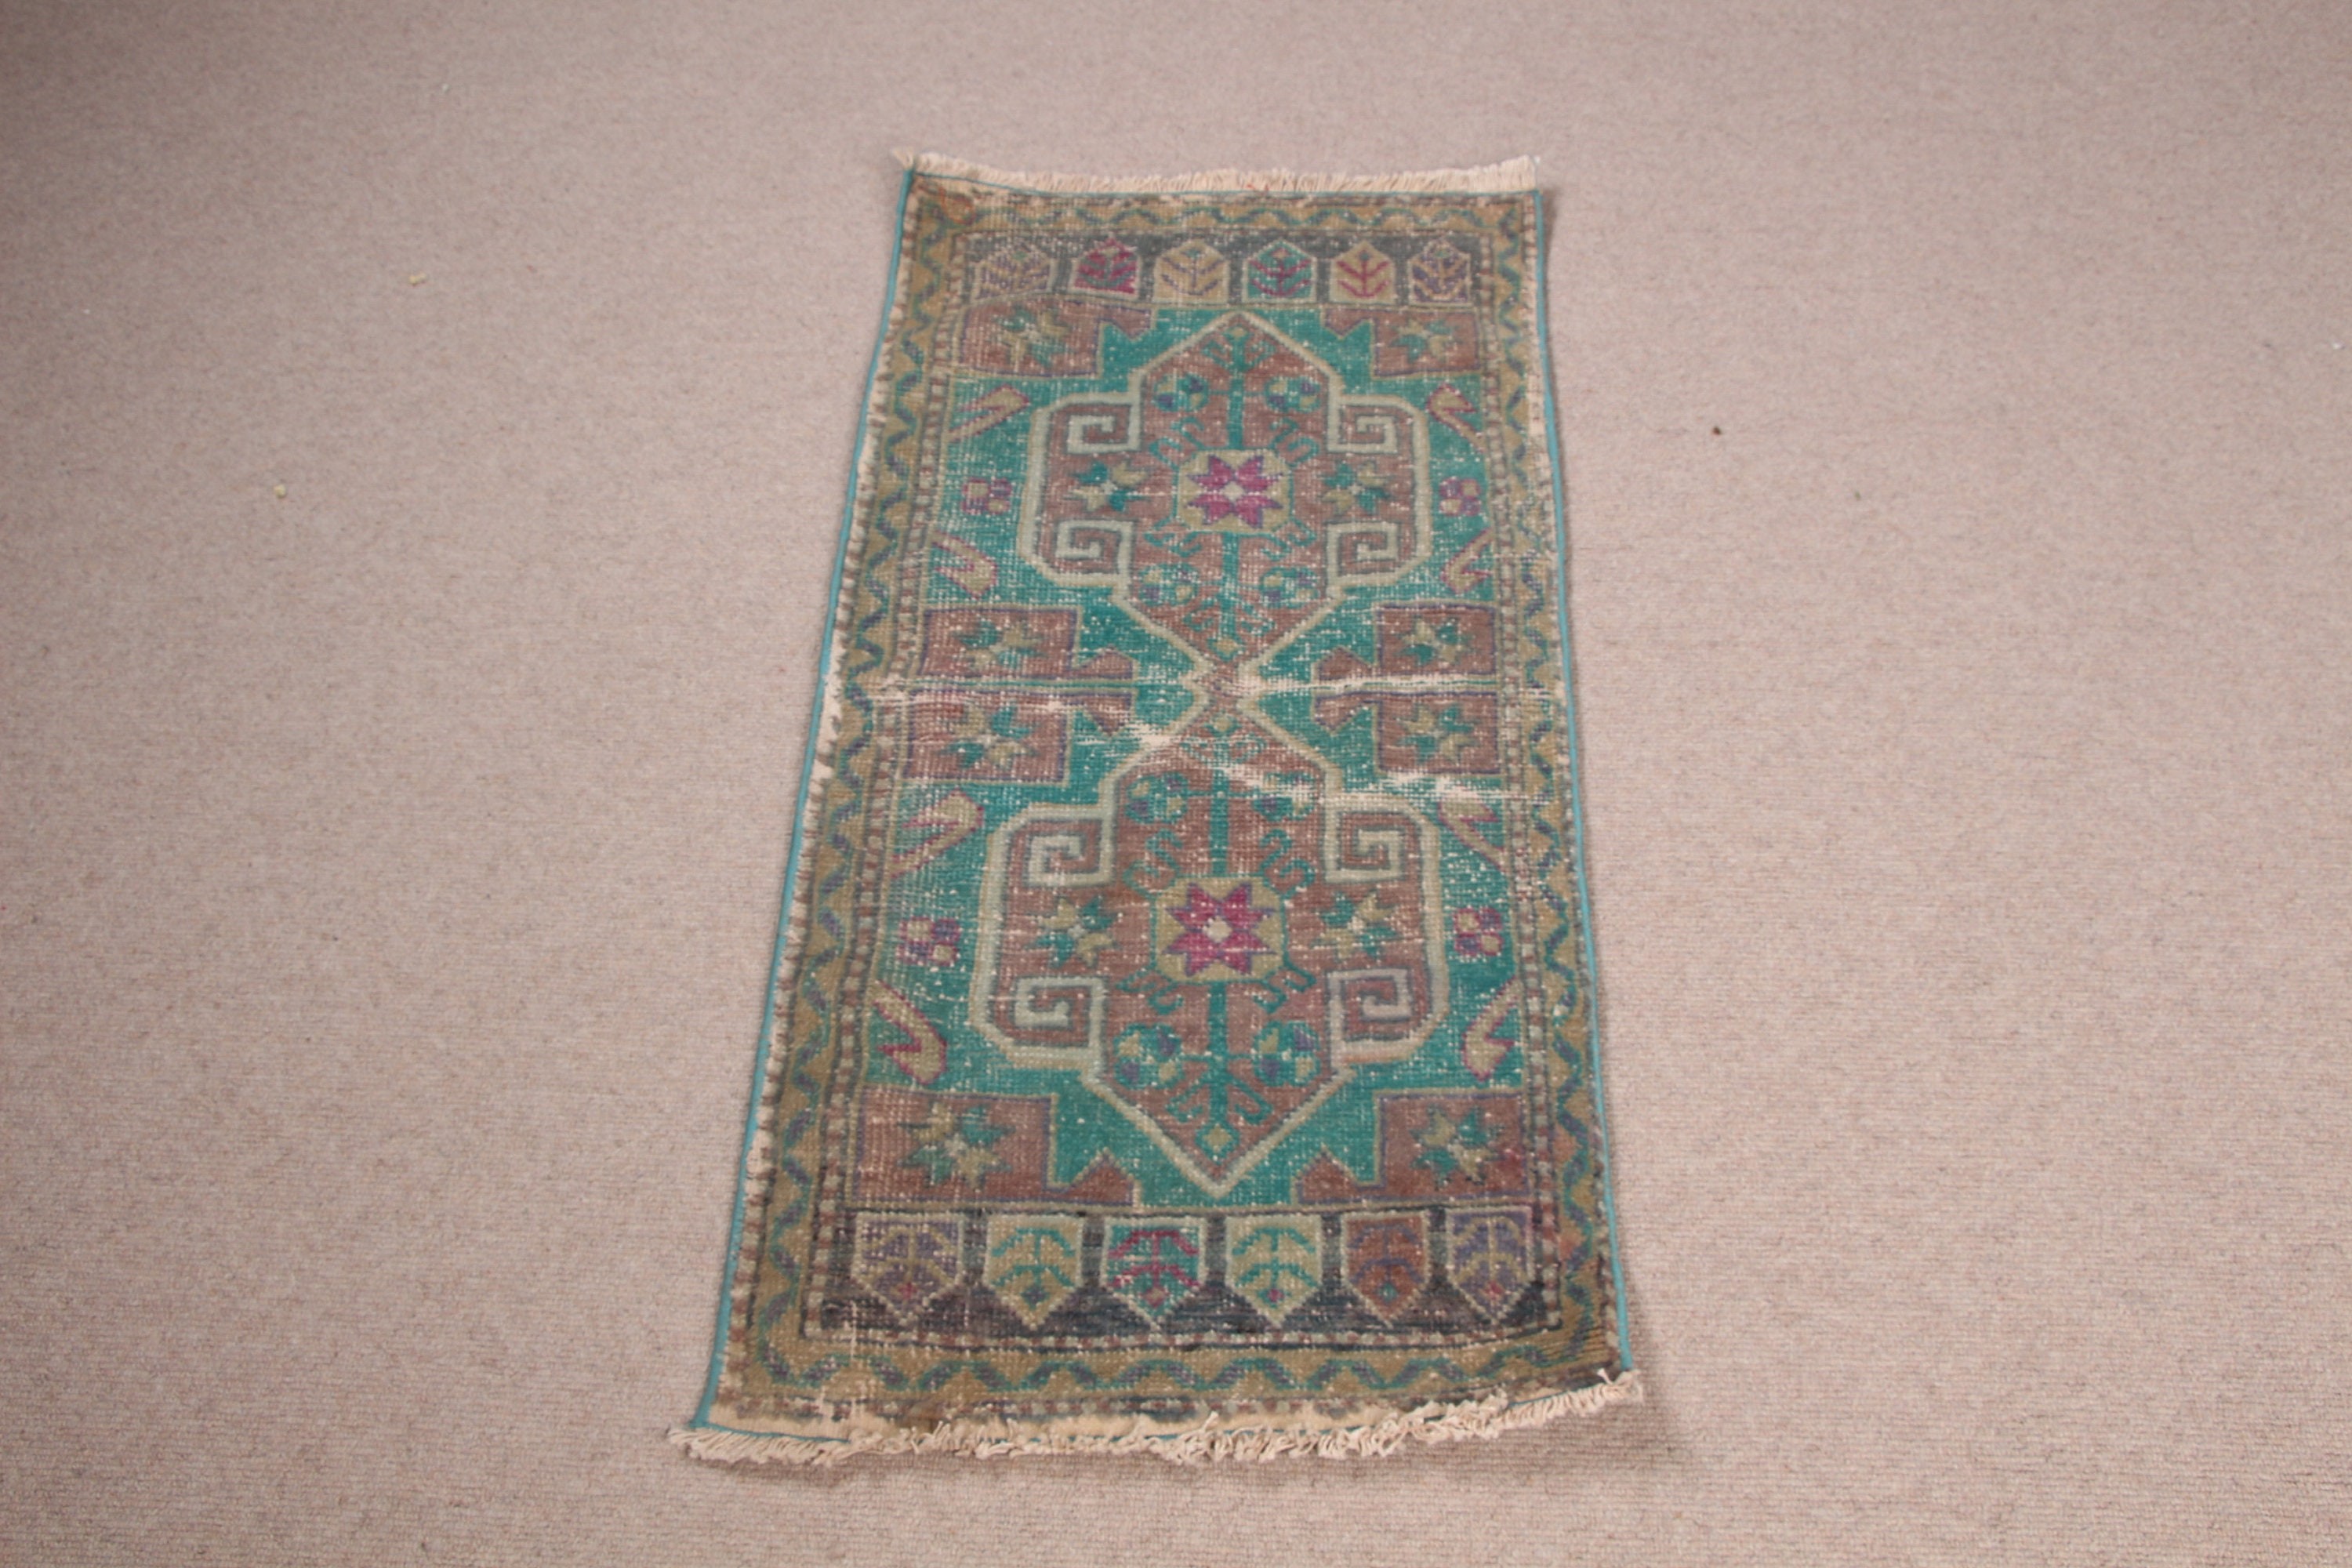 Bedroom Rug, Turkish Rug, 1.7x3.6 ft Small Rugs, Rugs for Car Mat, Car Mat Rug, Kitchen Rug, Green Home Decor Rugs, Cool Rug, Vintage Rugs